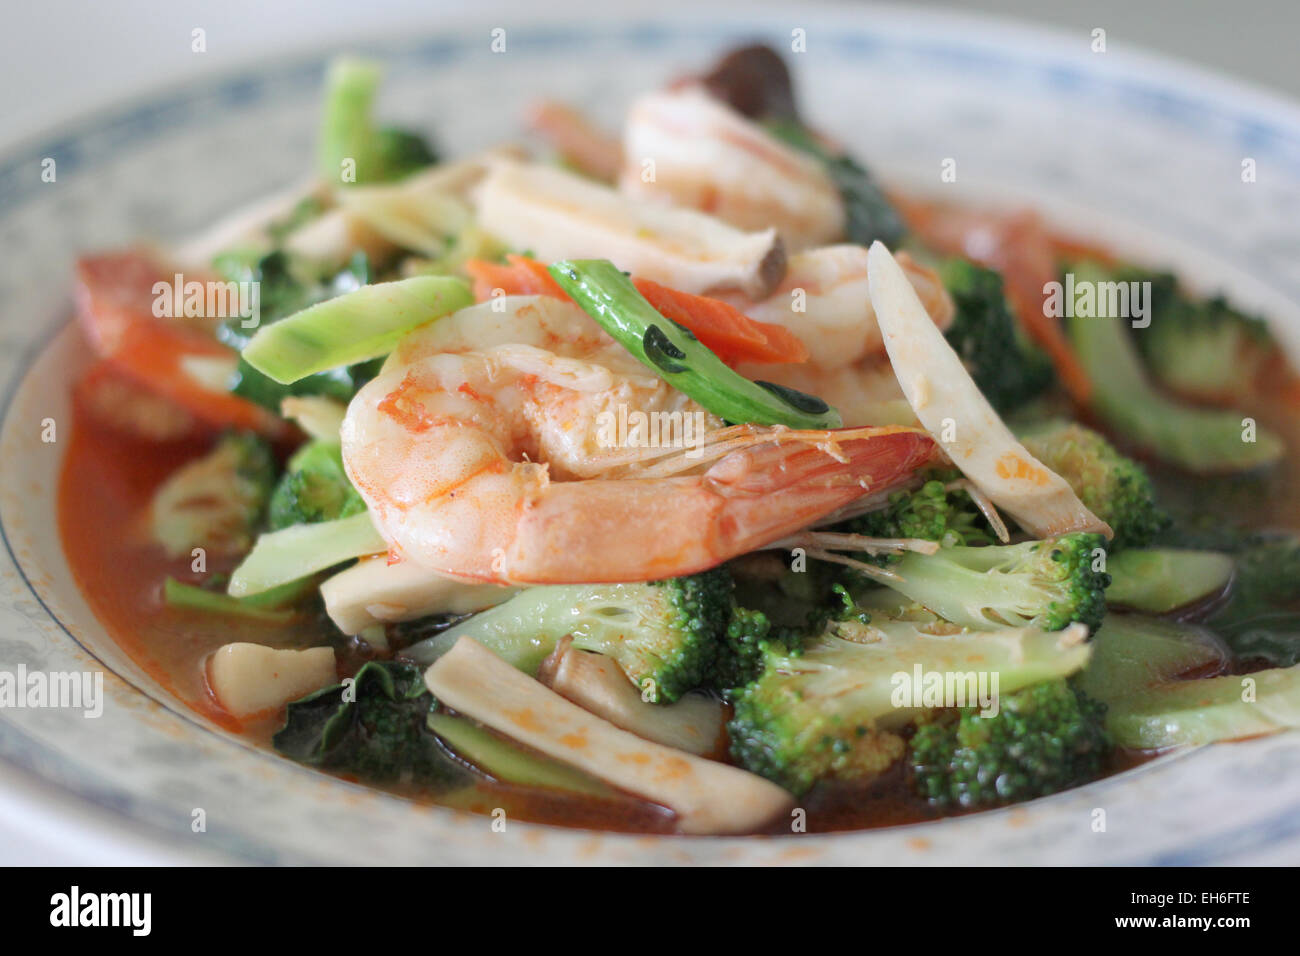 puff shrimps mix broccoli,This is Thai Foods. Stock Photo